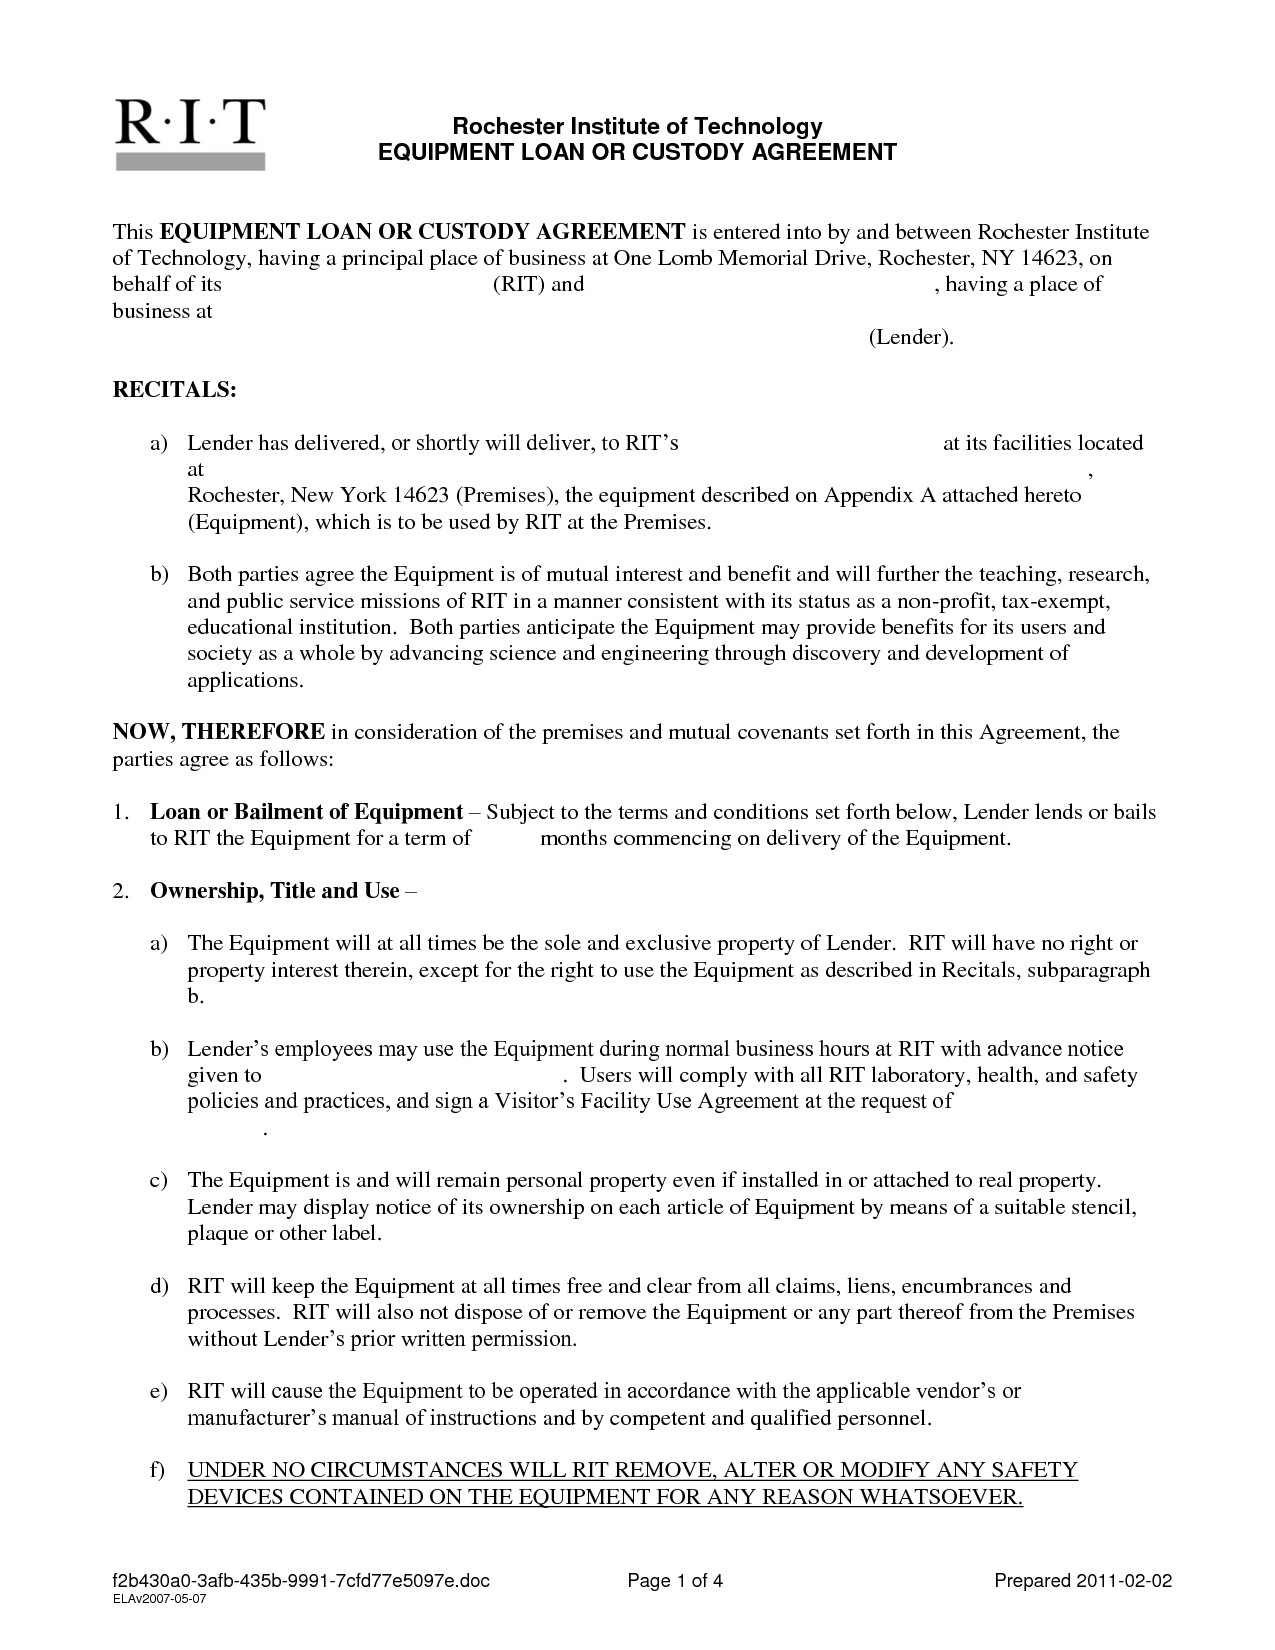 Personal Mortgage Loan Agreement Michigan 100 Bad Credit Car Document Template